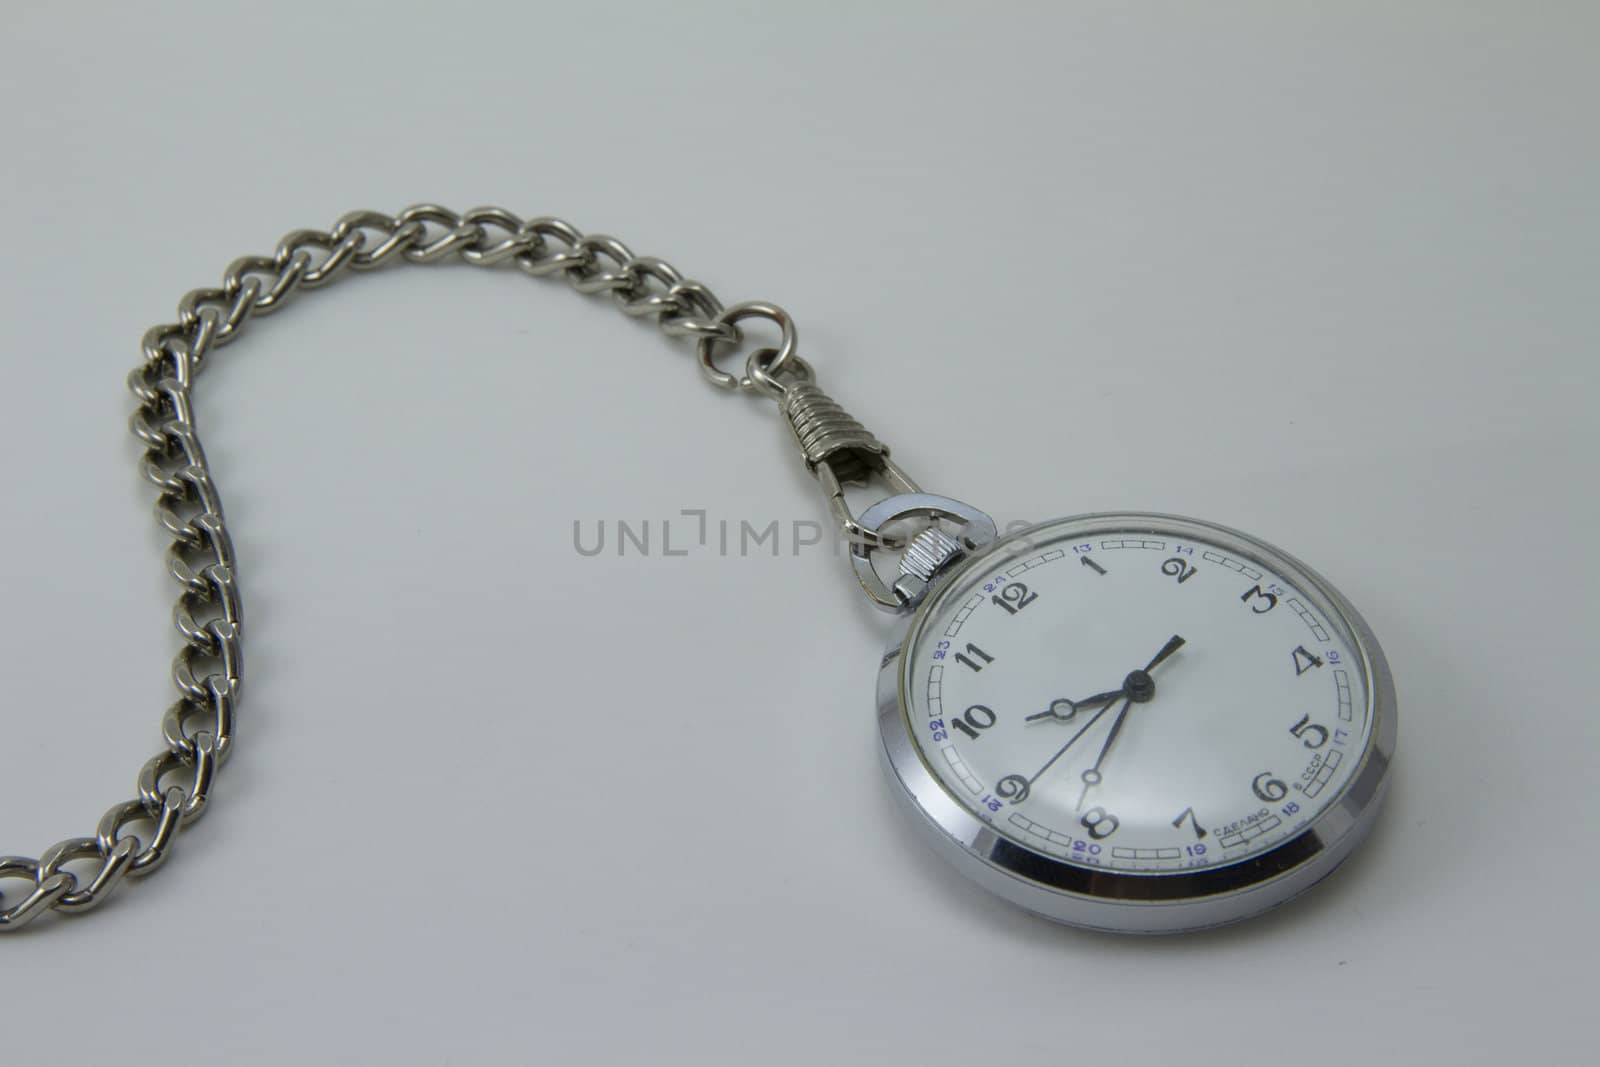 Old pocket watch with a chain